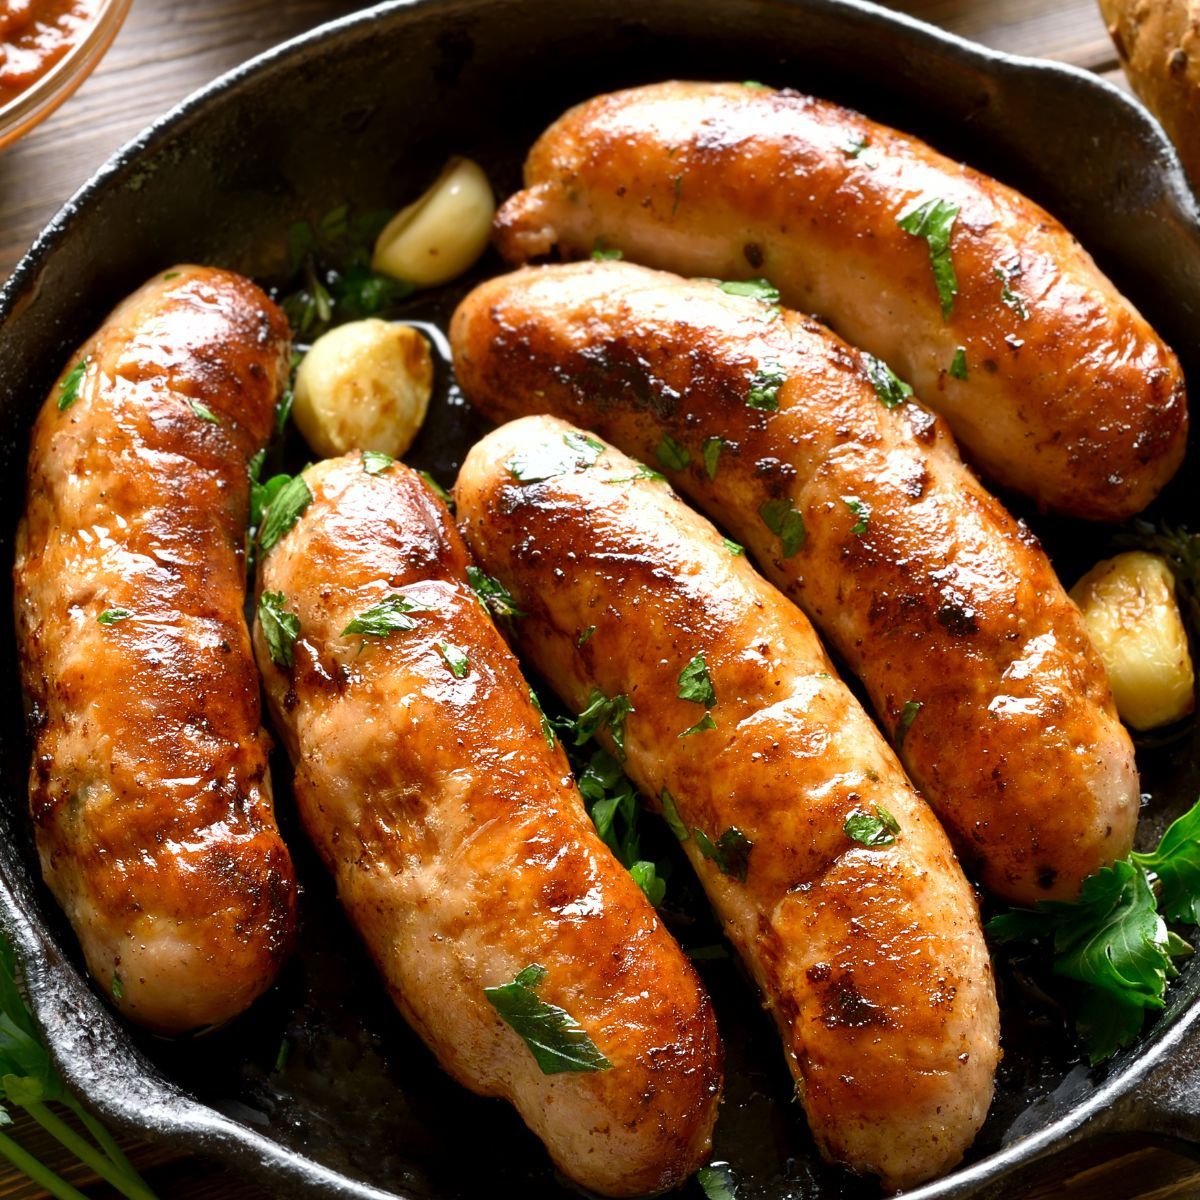 Square image for sausage internal temperatures, showing sausages in pan.